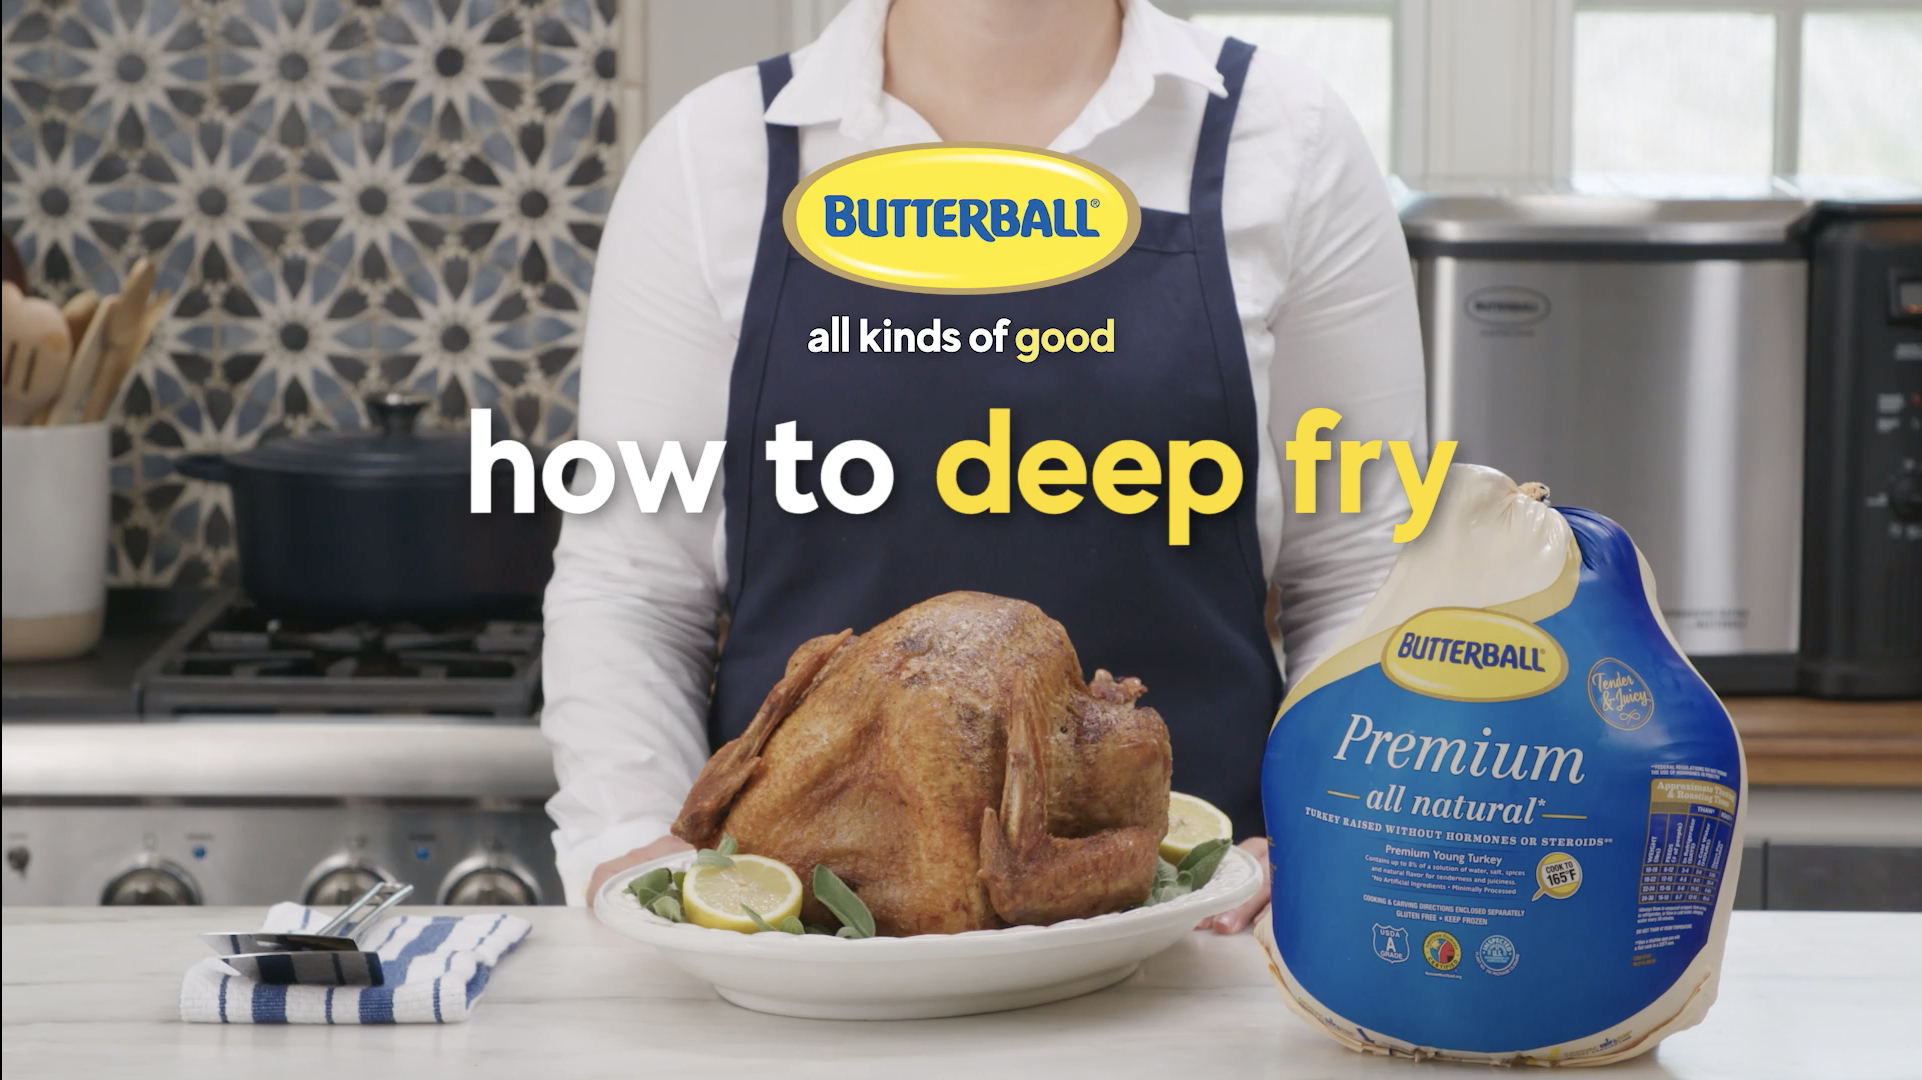 Butterball How to deep fry video thumbnail